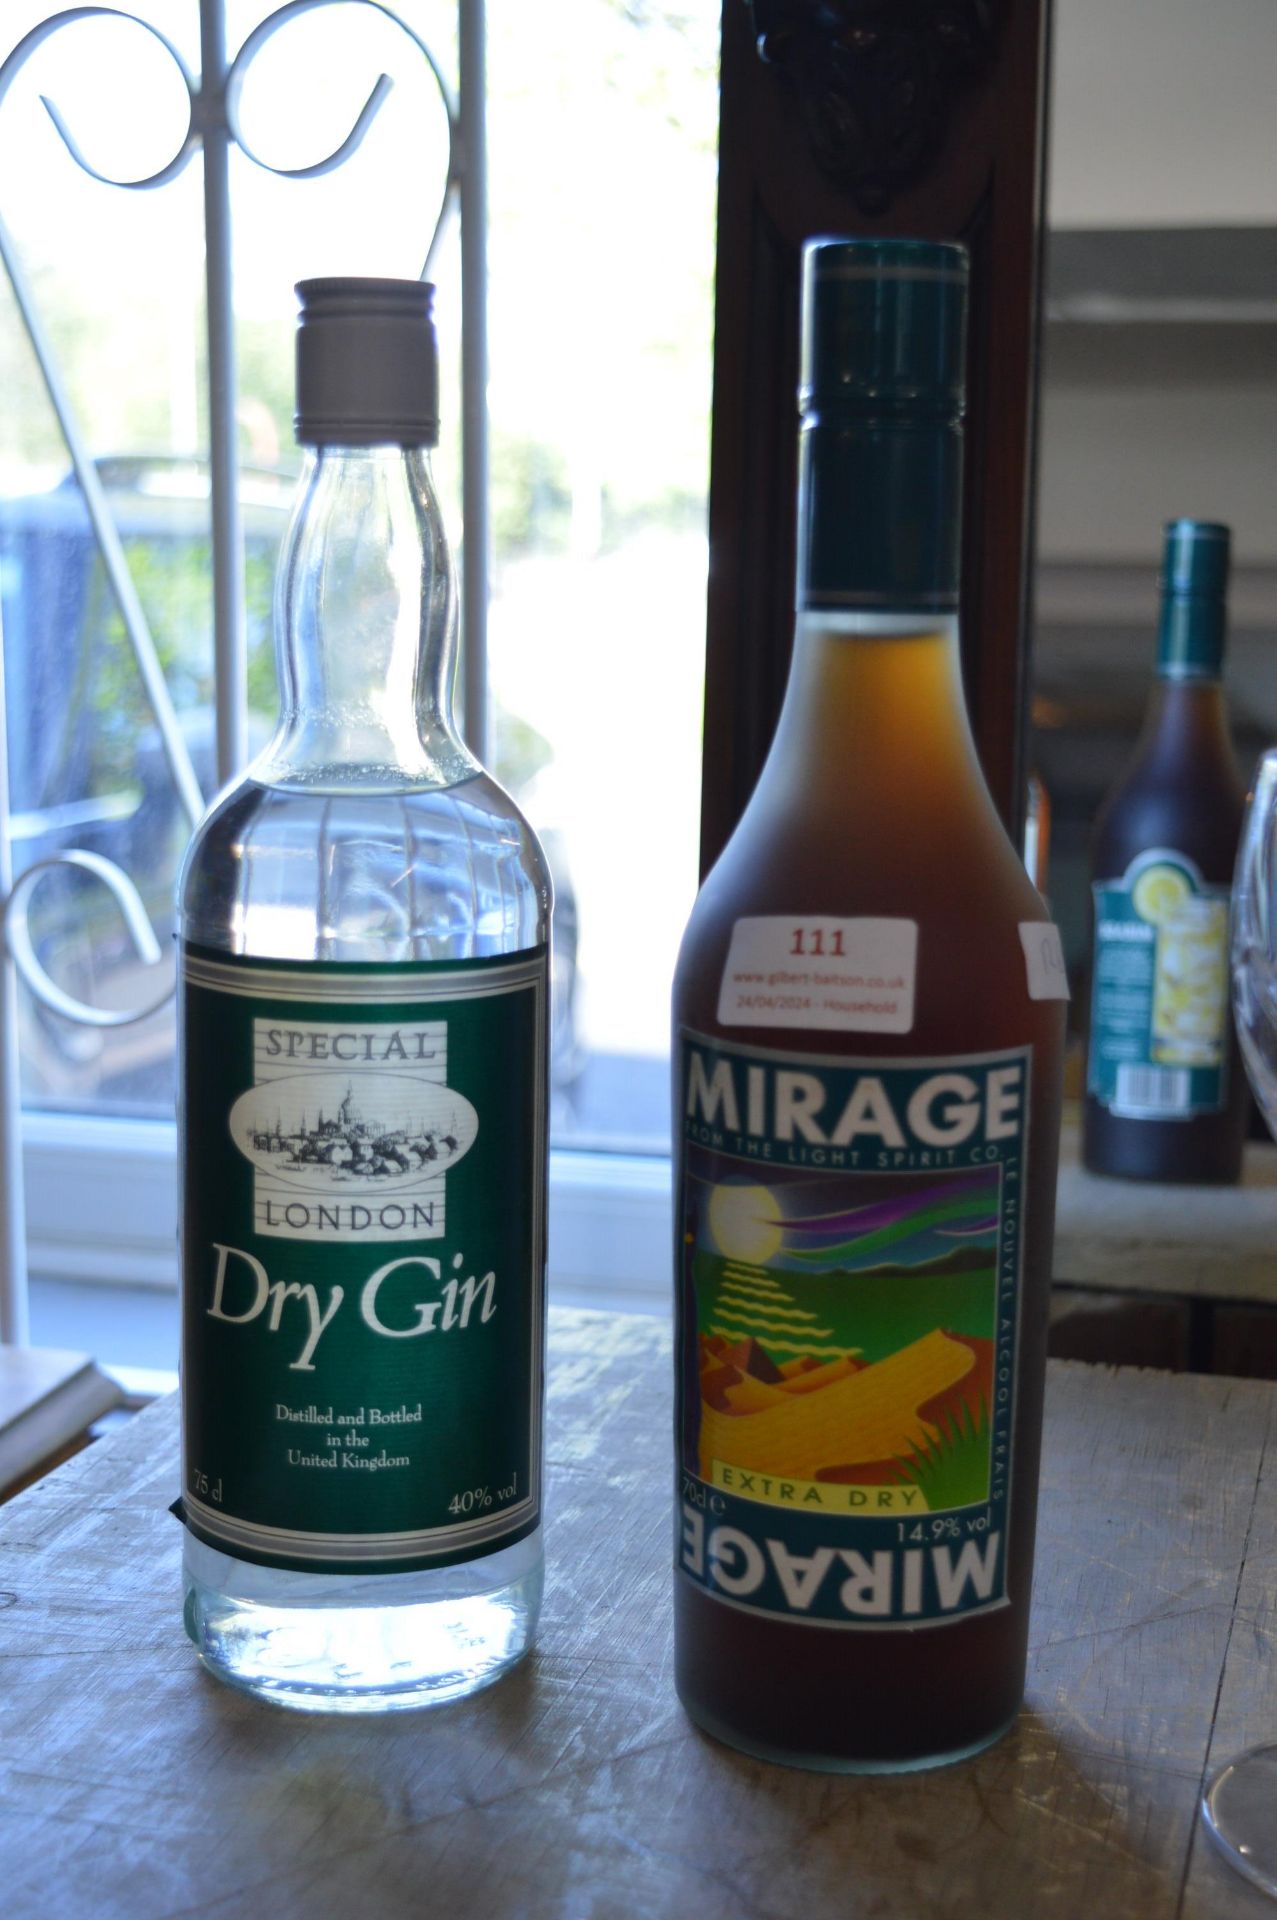 London Dry Gin and Mirage Extra Dry Gin